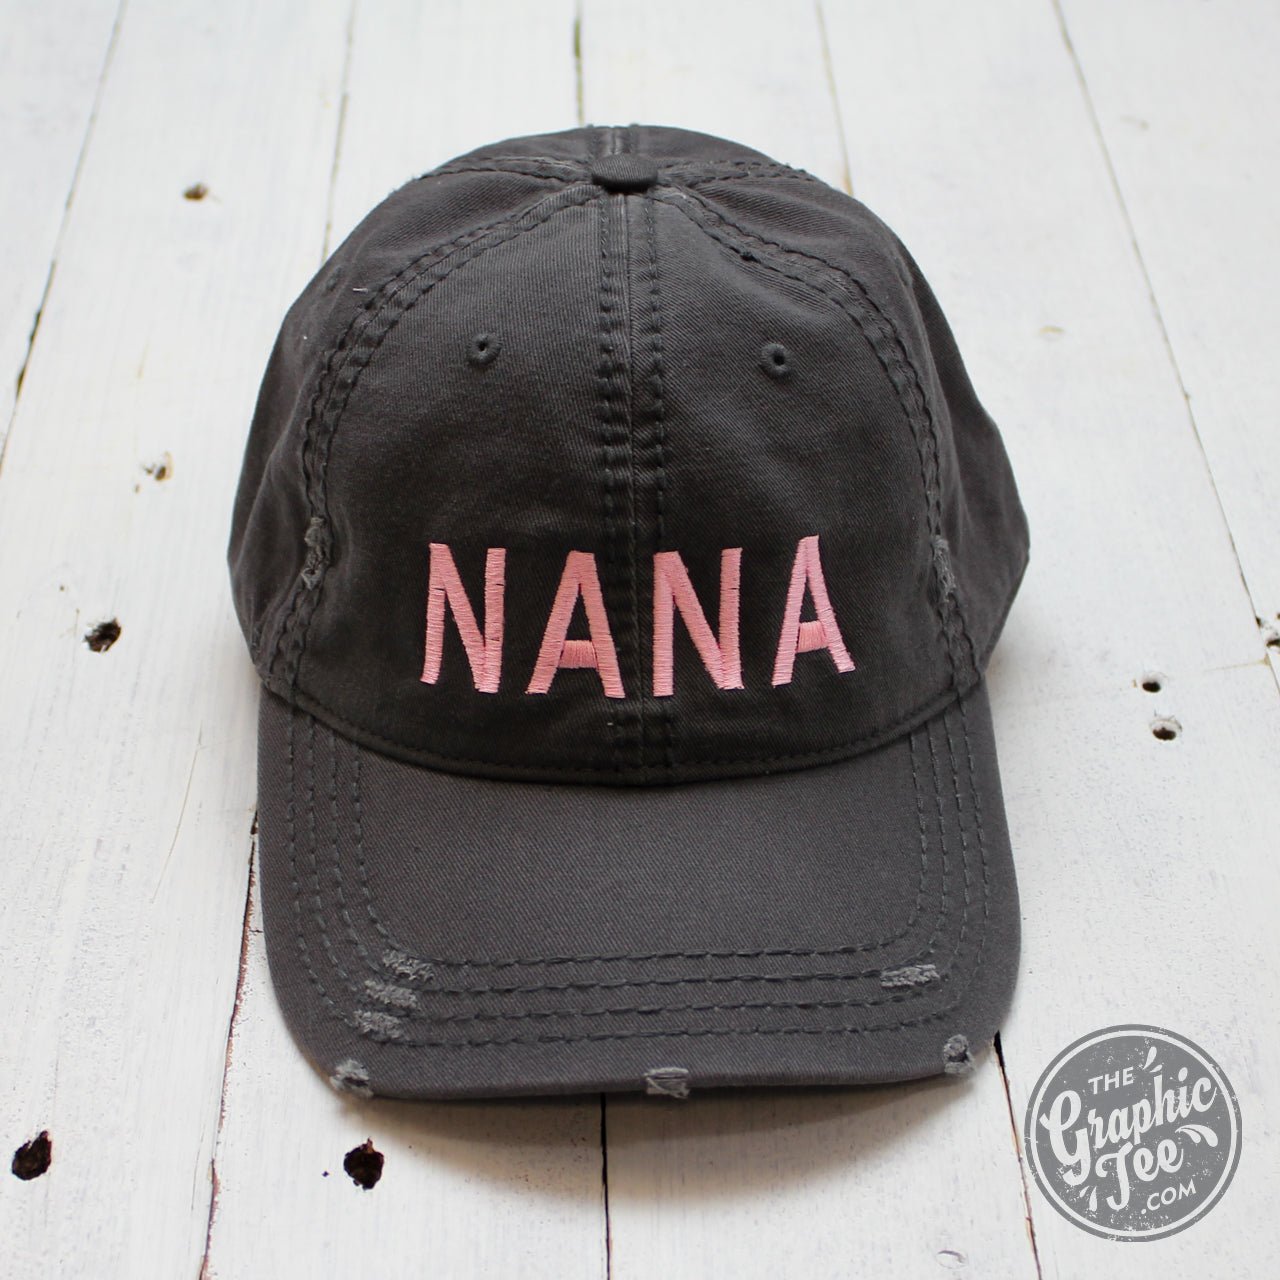 *WHOLESALE* Nana - Charcoal Distressed Canvas Hat - The Graphic Tee